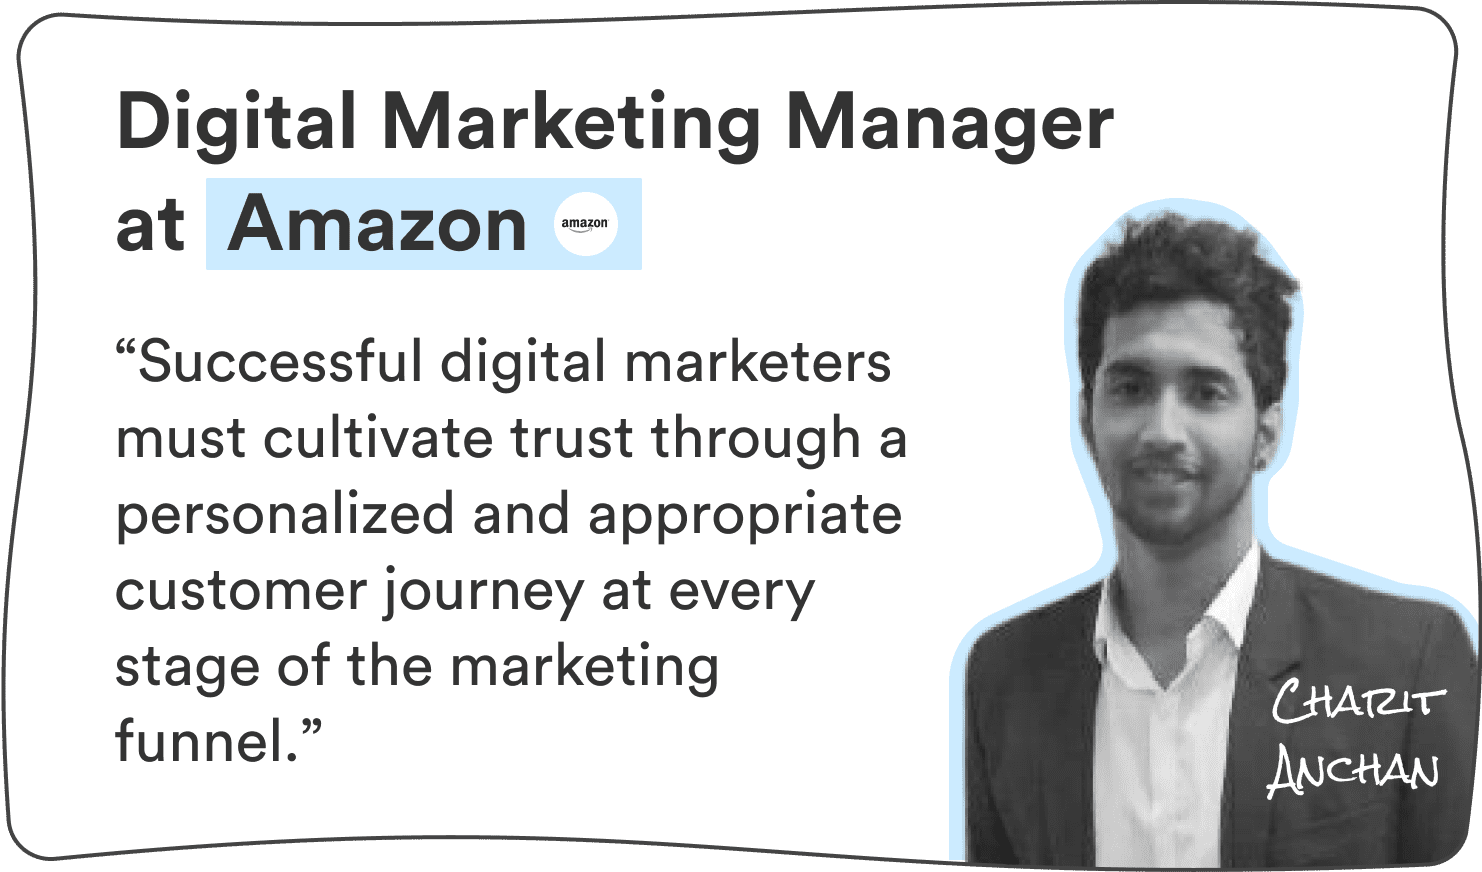 Charit Anchan, Digital Marketing Manager at Amazon: “Successful digital marketers must cultivate trust through a personalized and appropriate customer journey at every stage of the marketing funnel.”